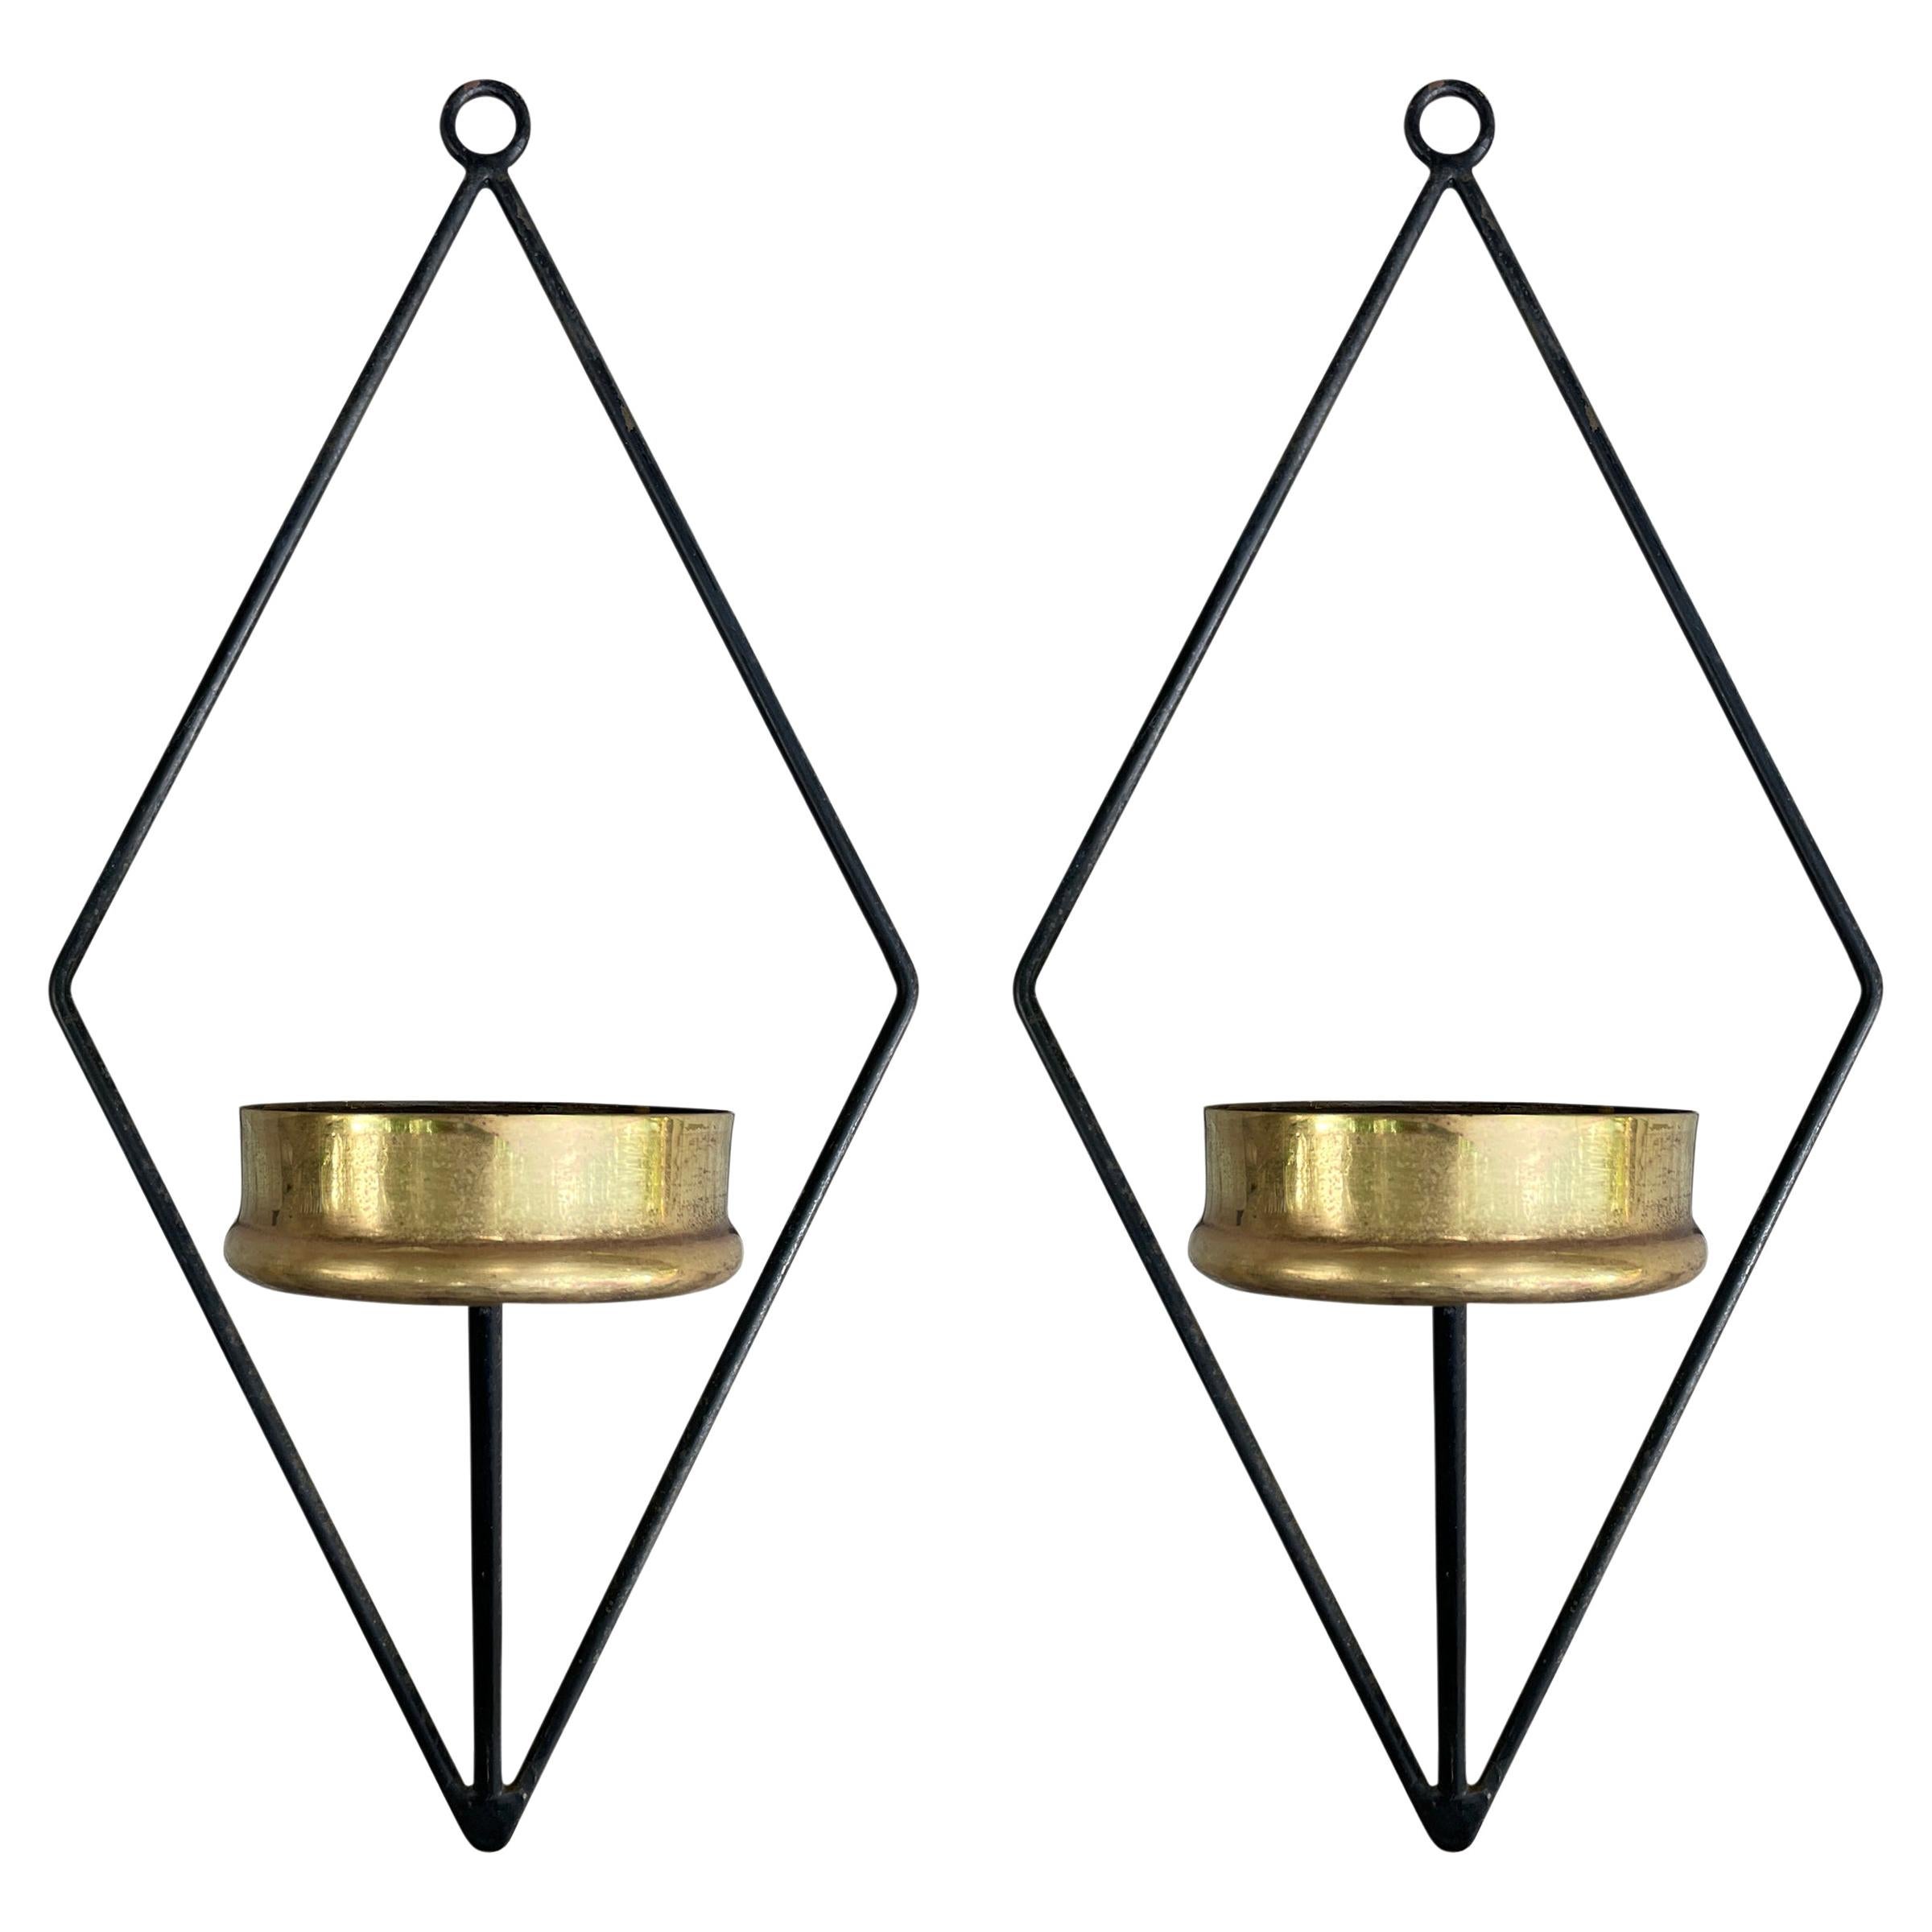 Pair of Mid-Century Candle Sconces